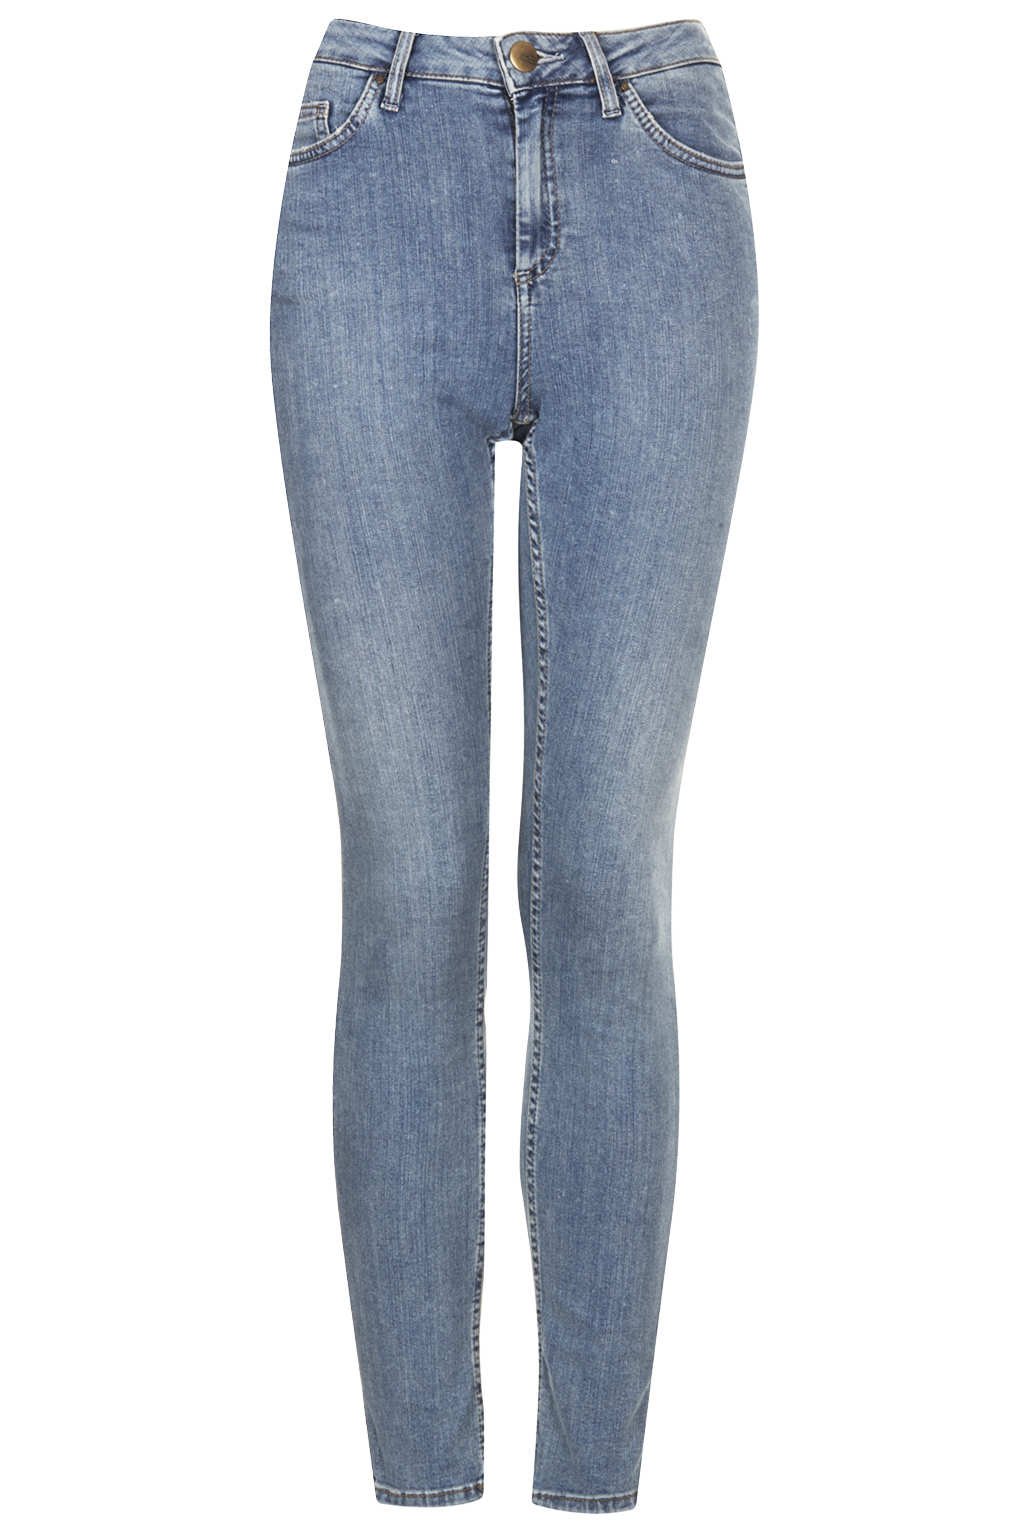 Lyst - Topshop Moto Light Vintage Jamie High Waisted Jeans in Blue